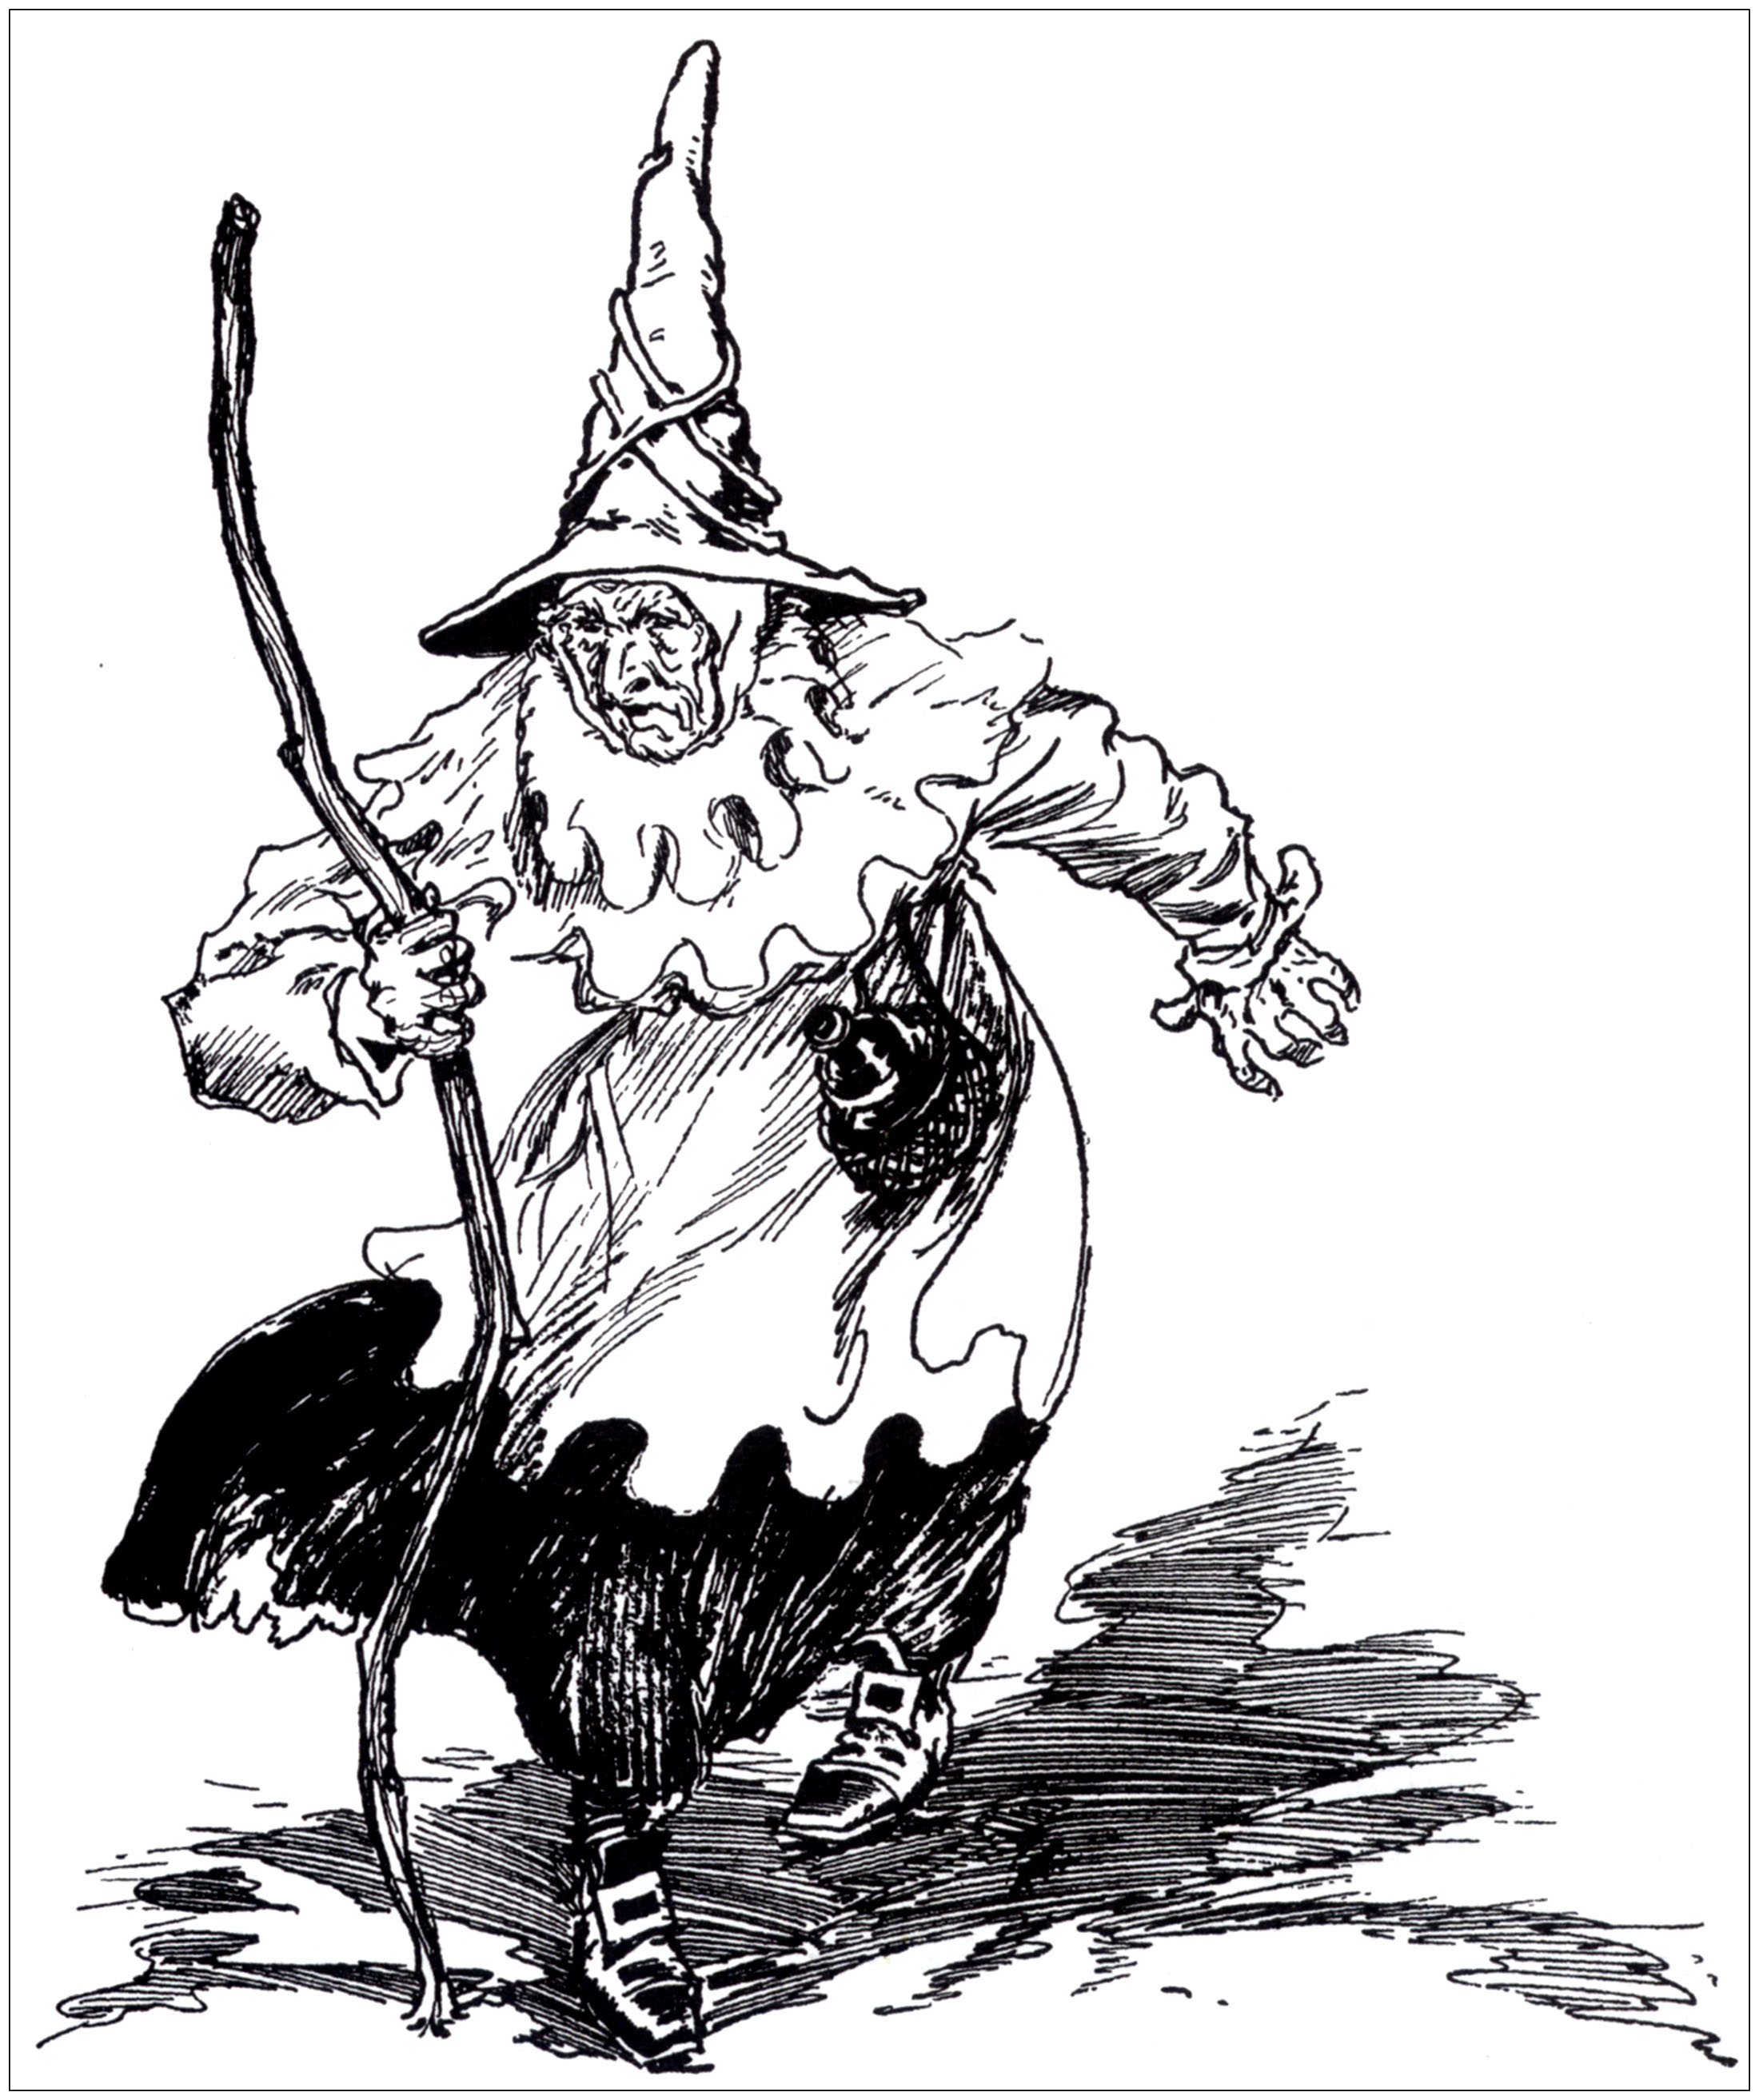 Halloween scary witch in old illustration - Halloween ...